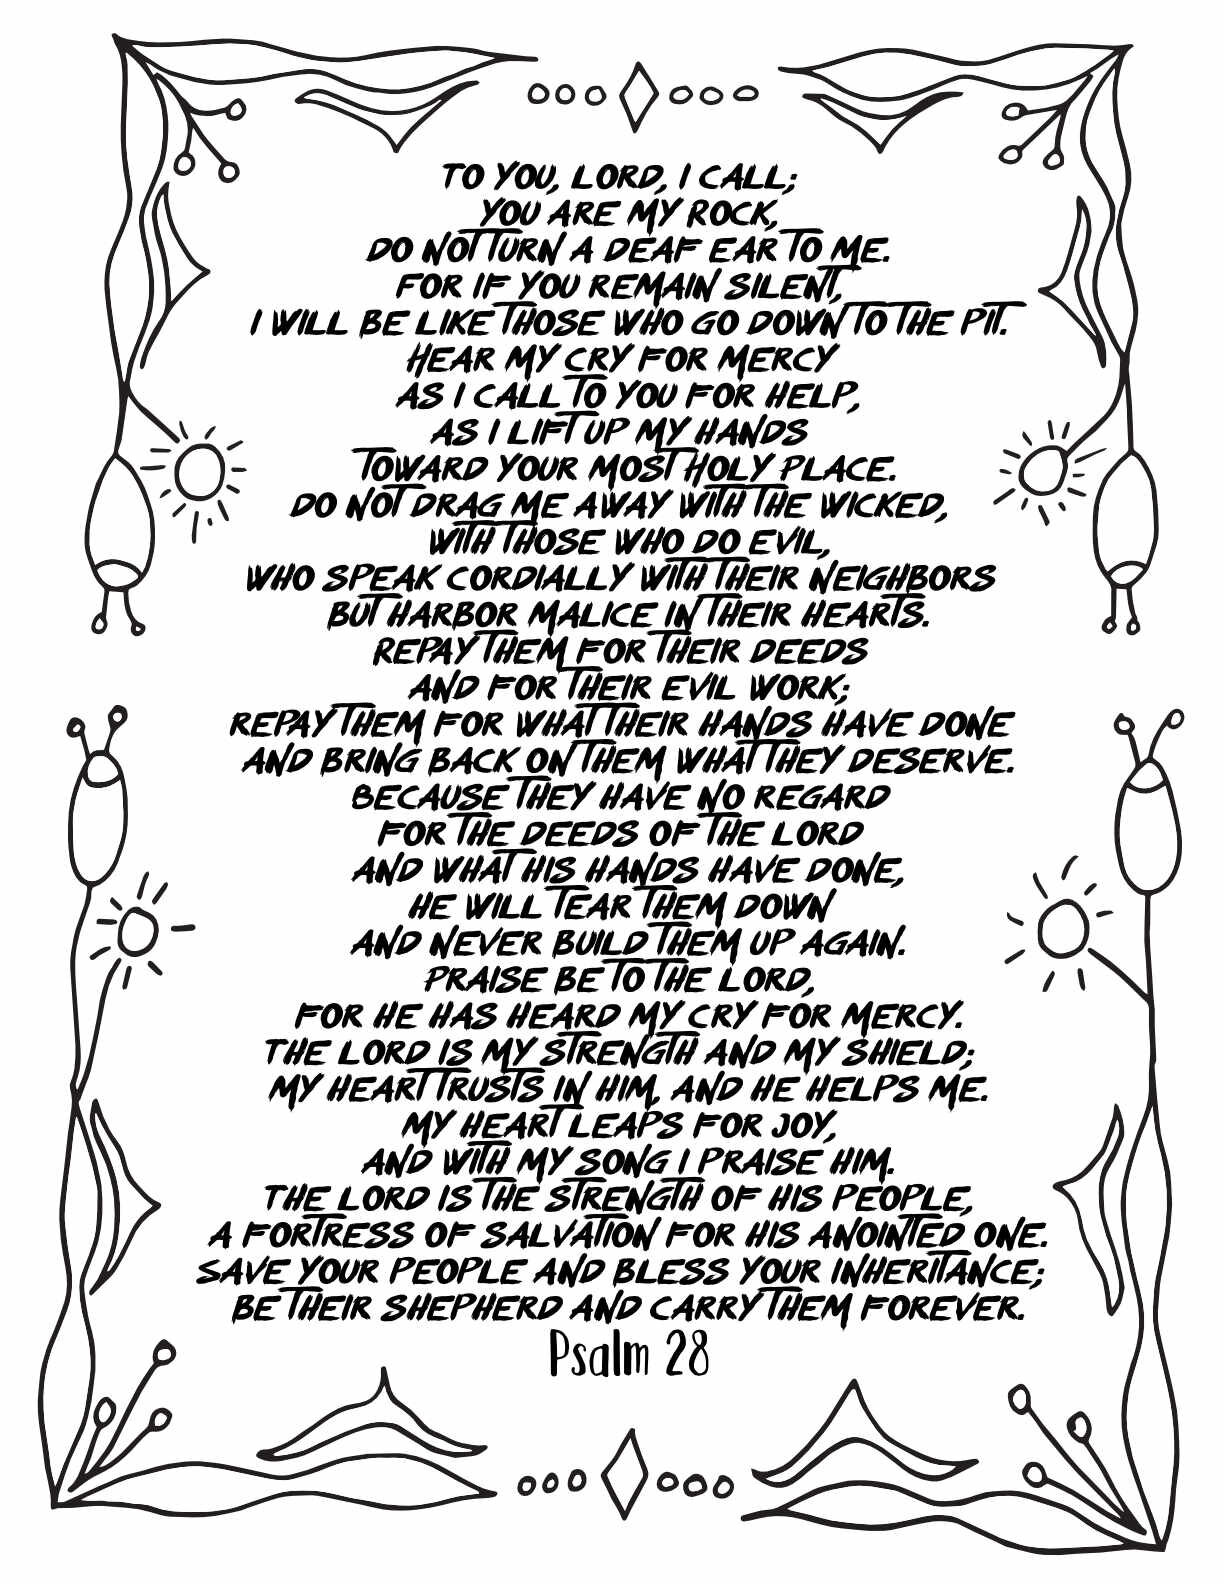 10 Free Printable Psalm Coloring Pages - Download and Color Adult Scripture - Psalm 28CLICK HERE TO DOWNLOAD THIS PAGE FREE